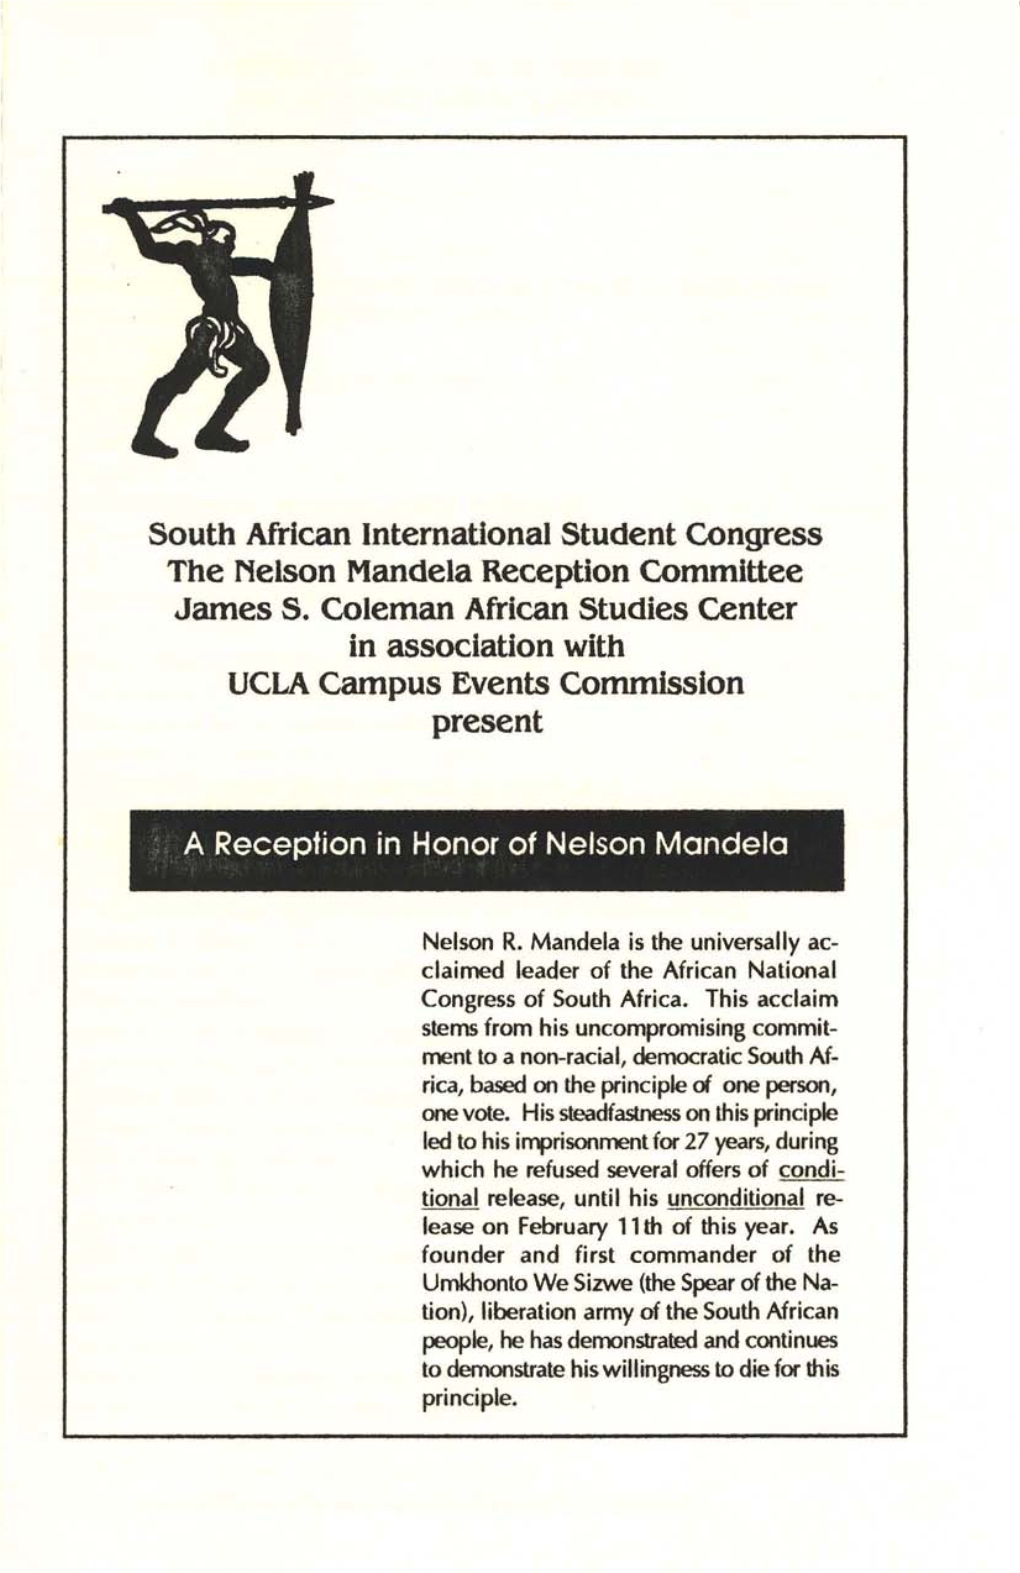 South African International Student Congress the Nelson Mandela Reception Committee James S